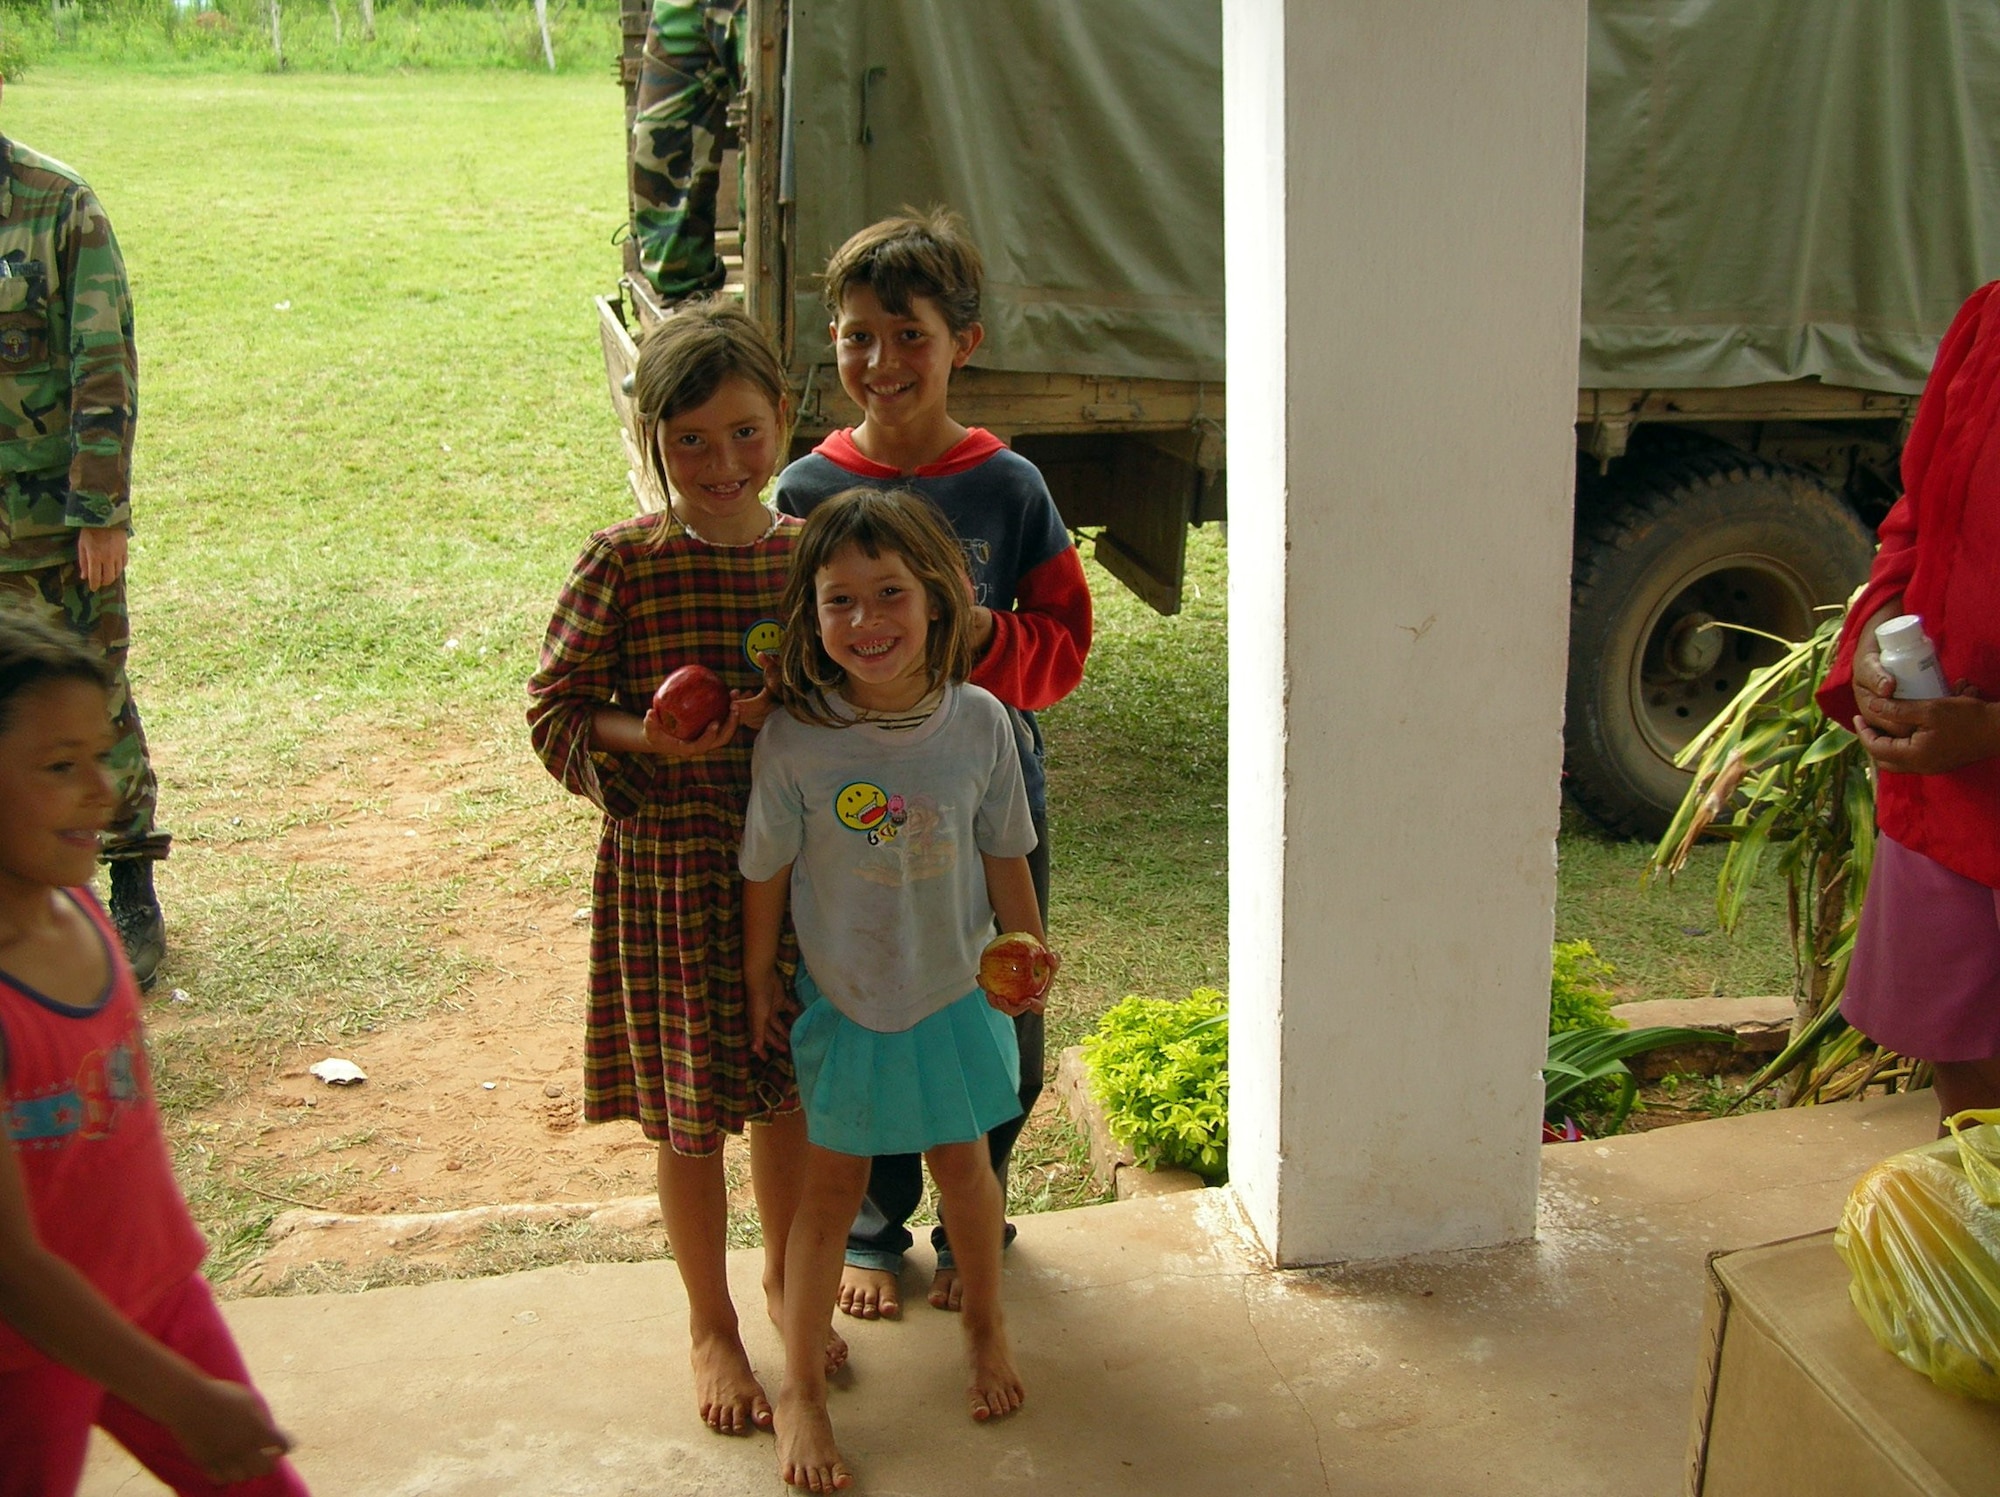 PARAGUAY (AFPN) -- Three Paraguayan children smile for the camera after receiving apples at one of the medical sites set up by Air Force and Paraguayan doctors. (U.S. Air Force photo by Lt. Col. Marc Robins)